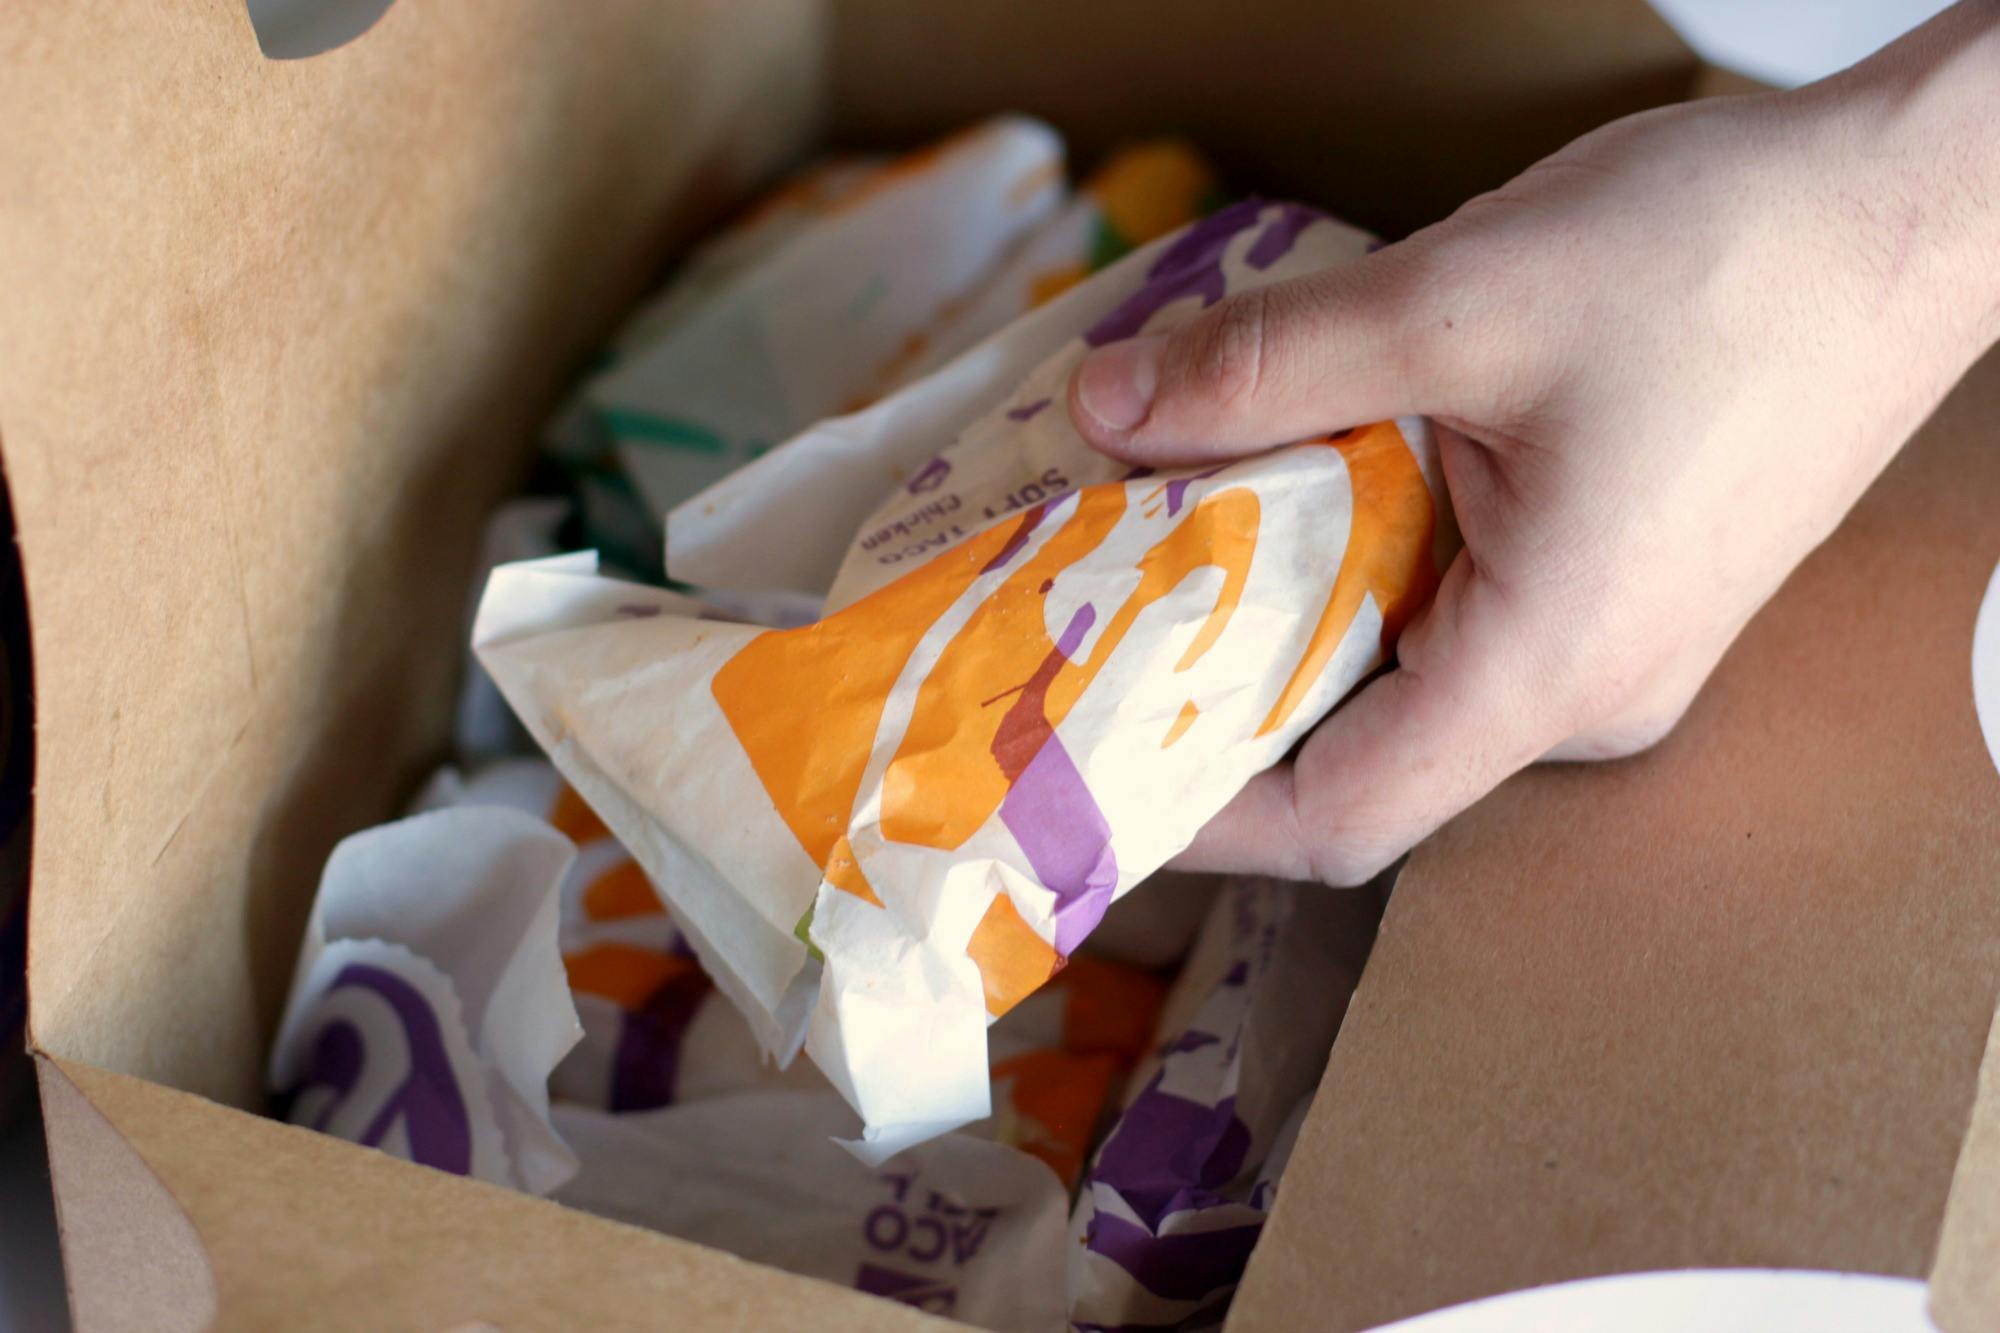 A person's hand taking a wrapped taco from a Taco Bell taco box.